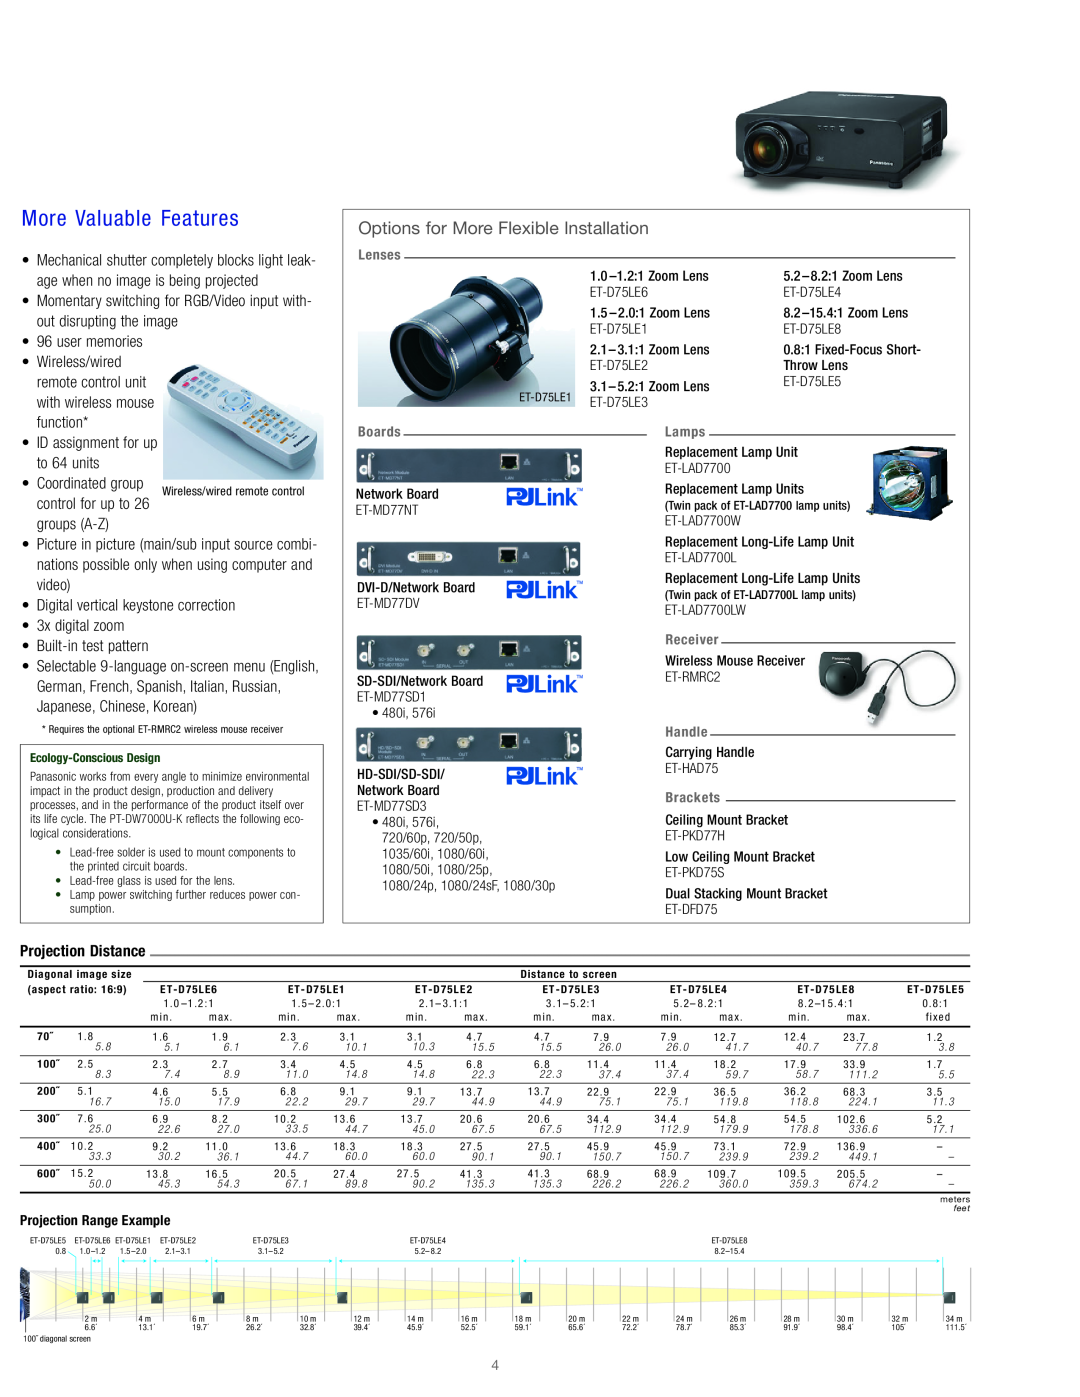 Panasonic PT-DW7000U-K manual More Valuable Features, Options for More Flexible Installation 